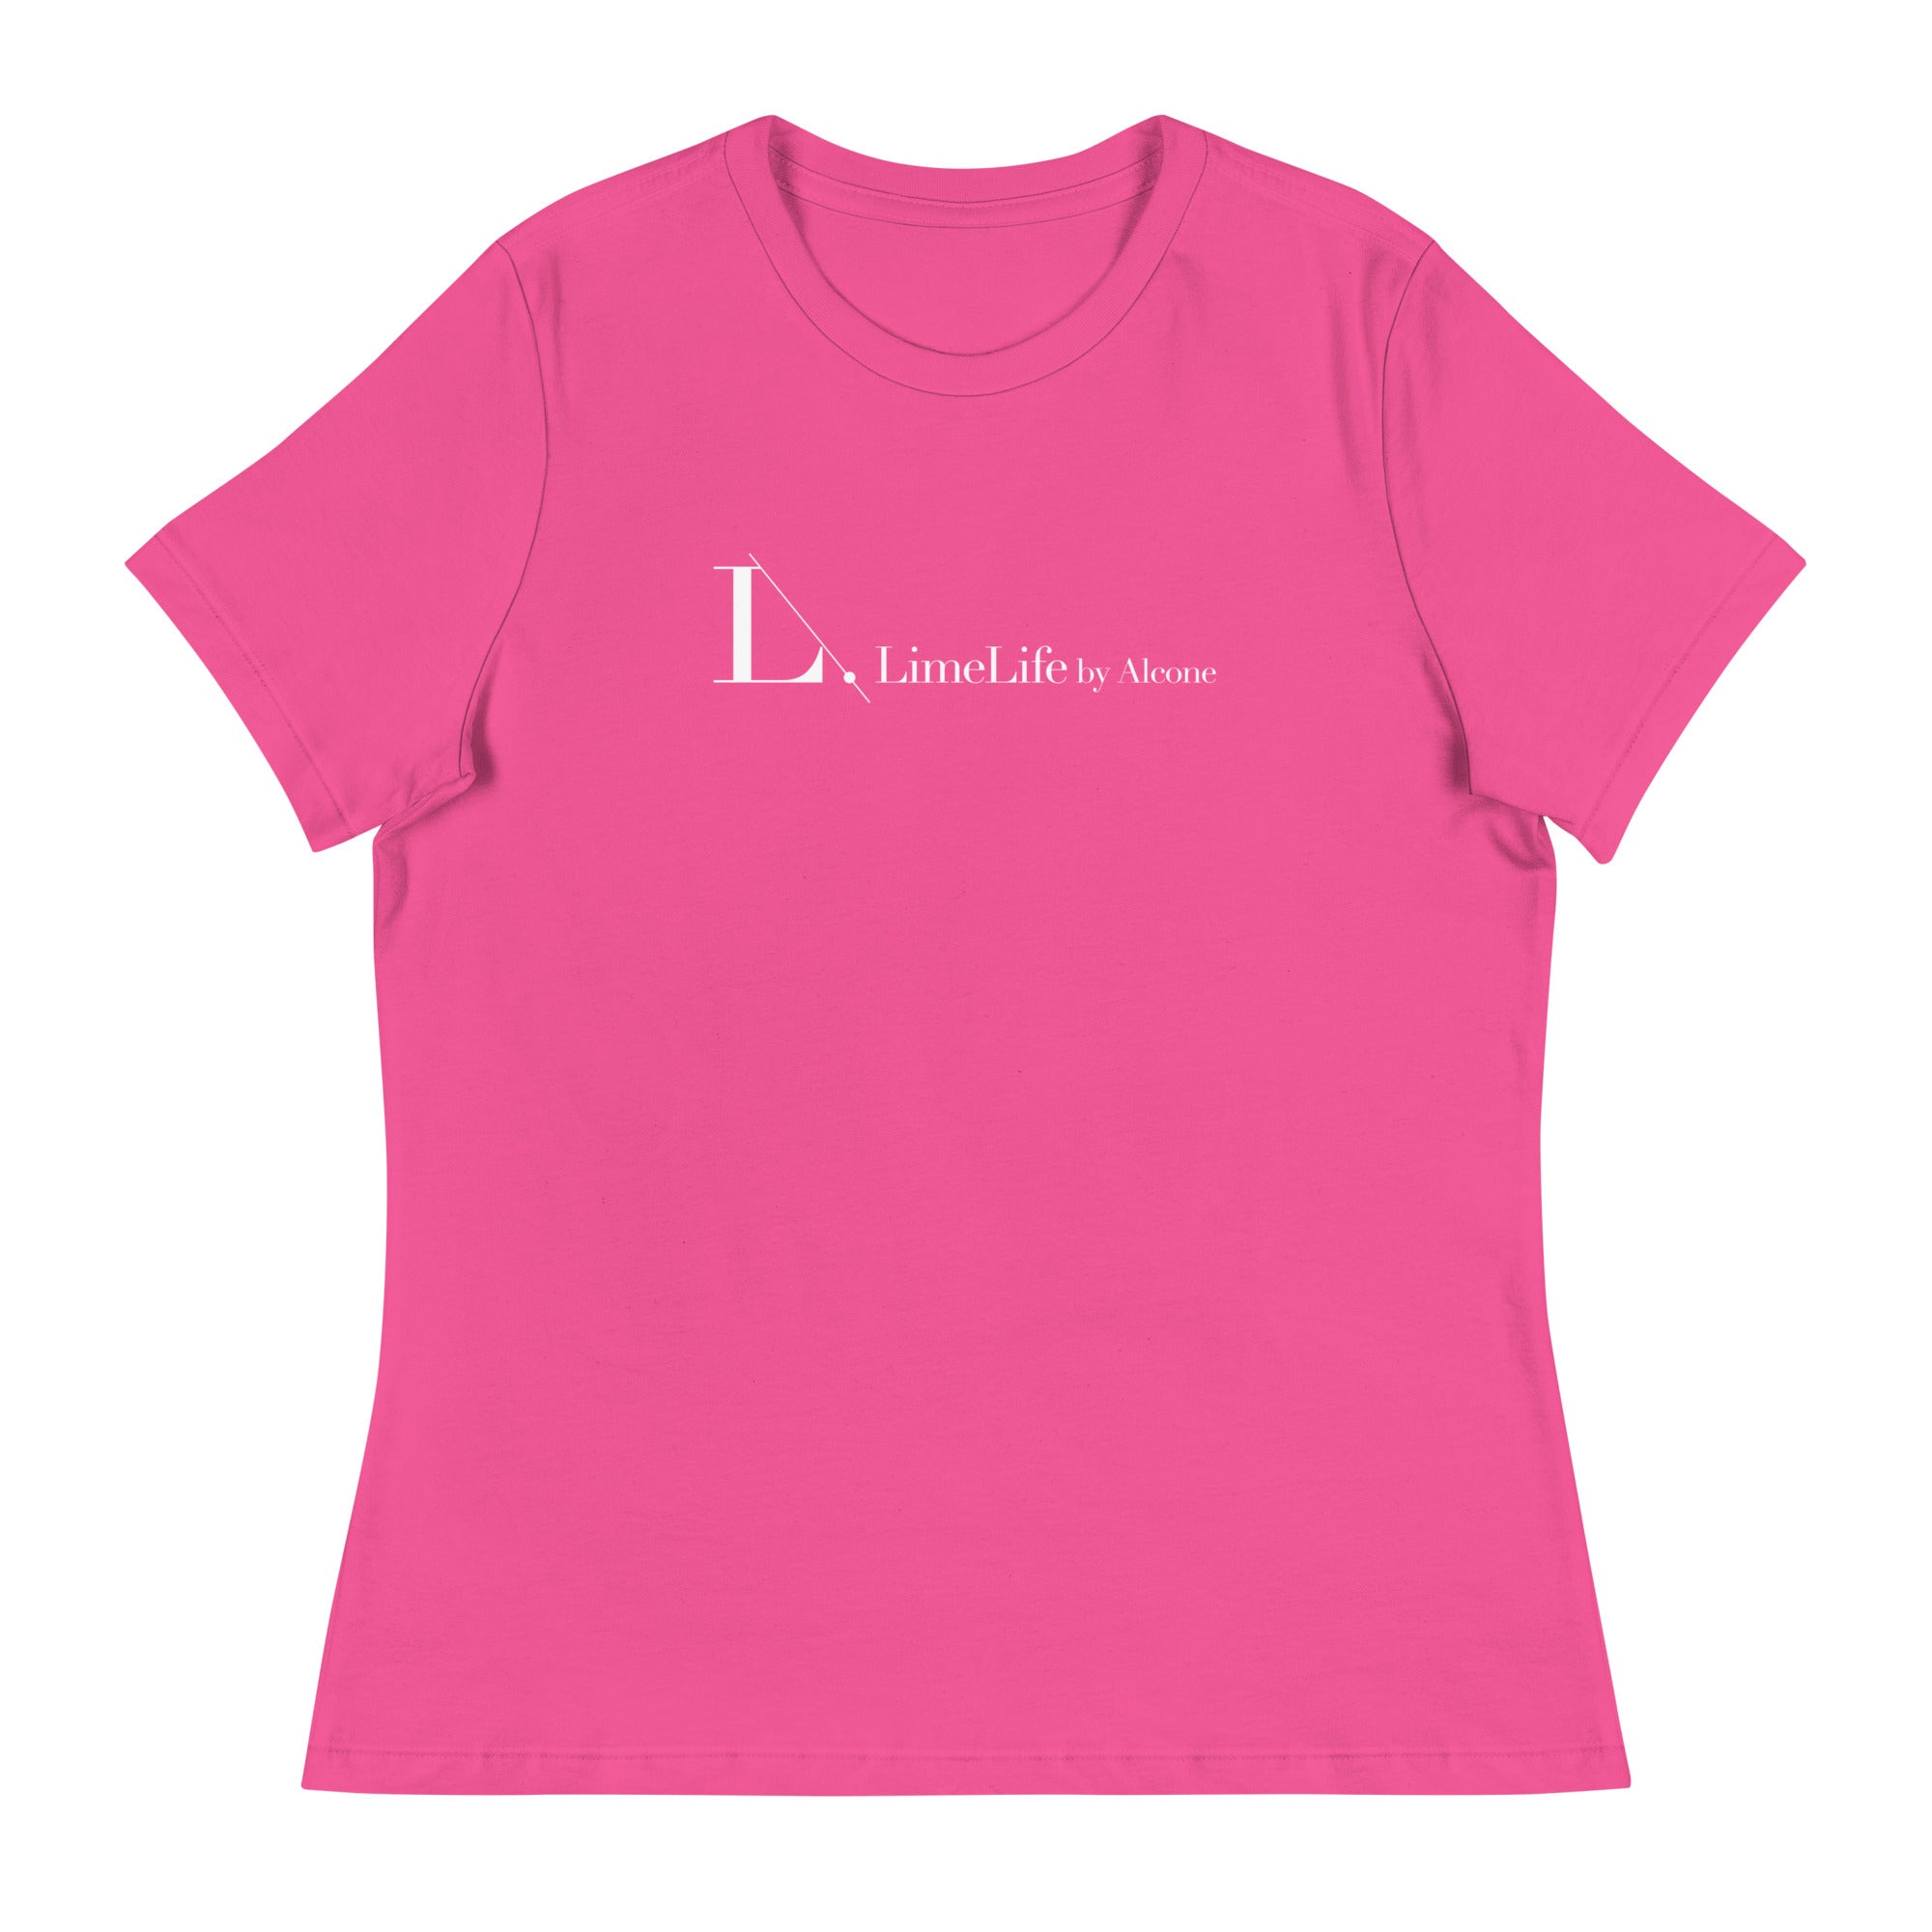 LimeLife by Alcone - Women's Relaxed T-Shirt in "LIMITED EDITION PINK" and black